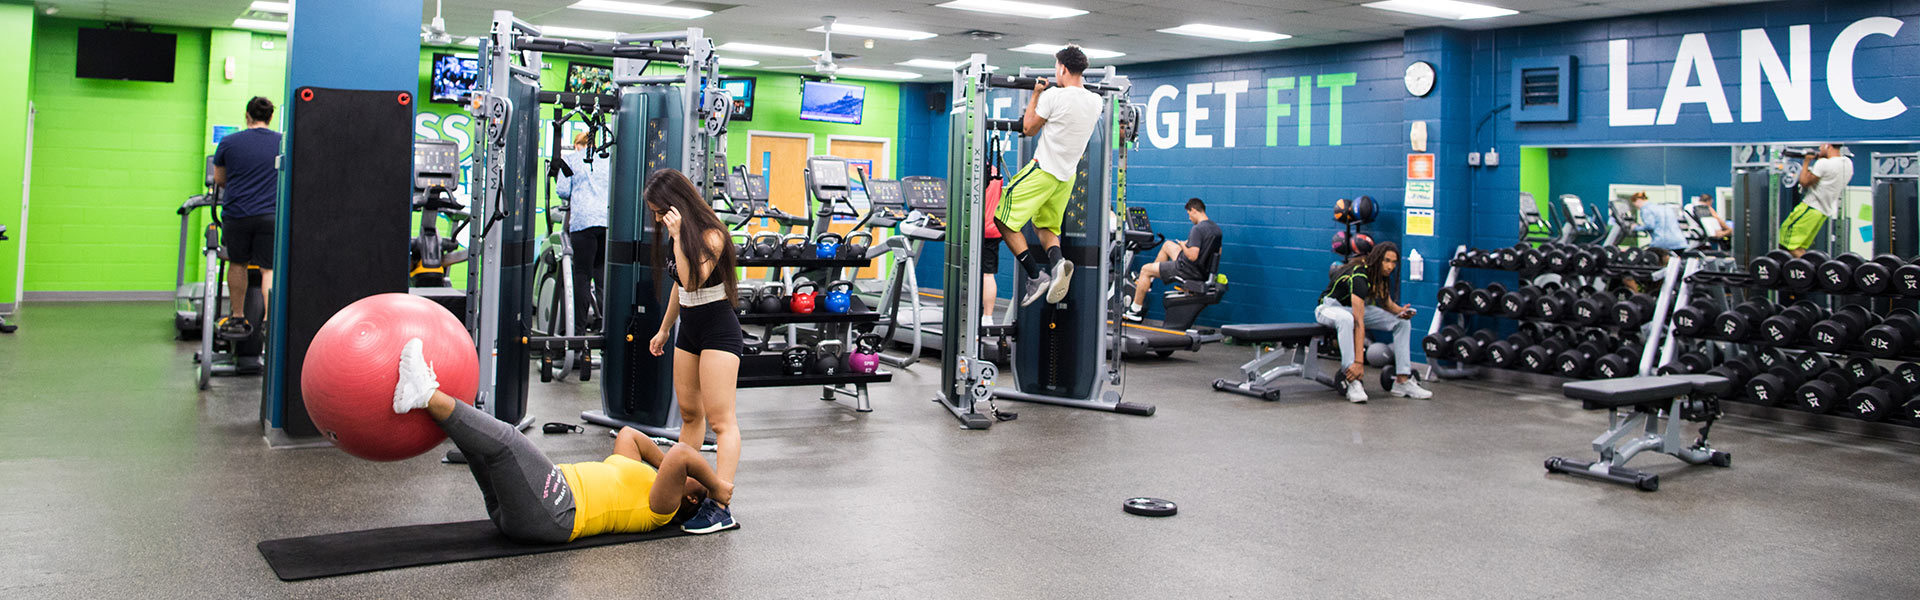 Fitness Room with students exercising